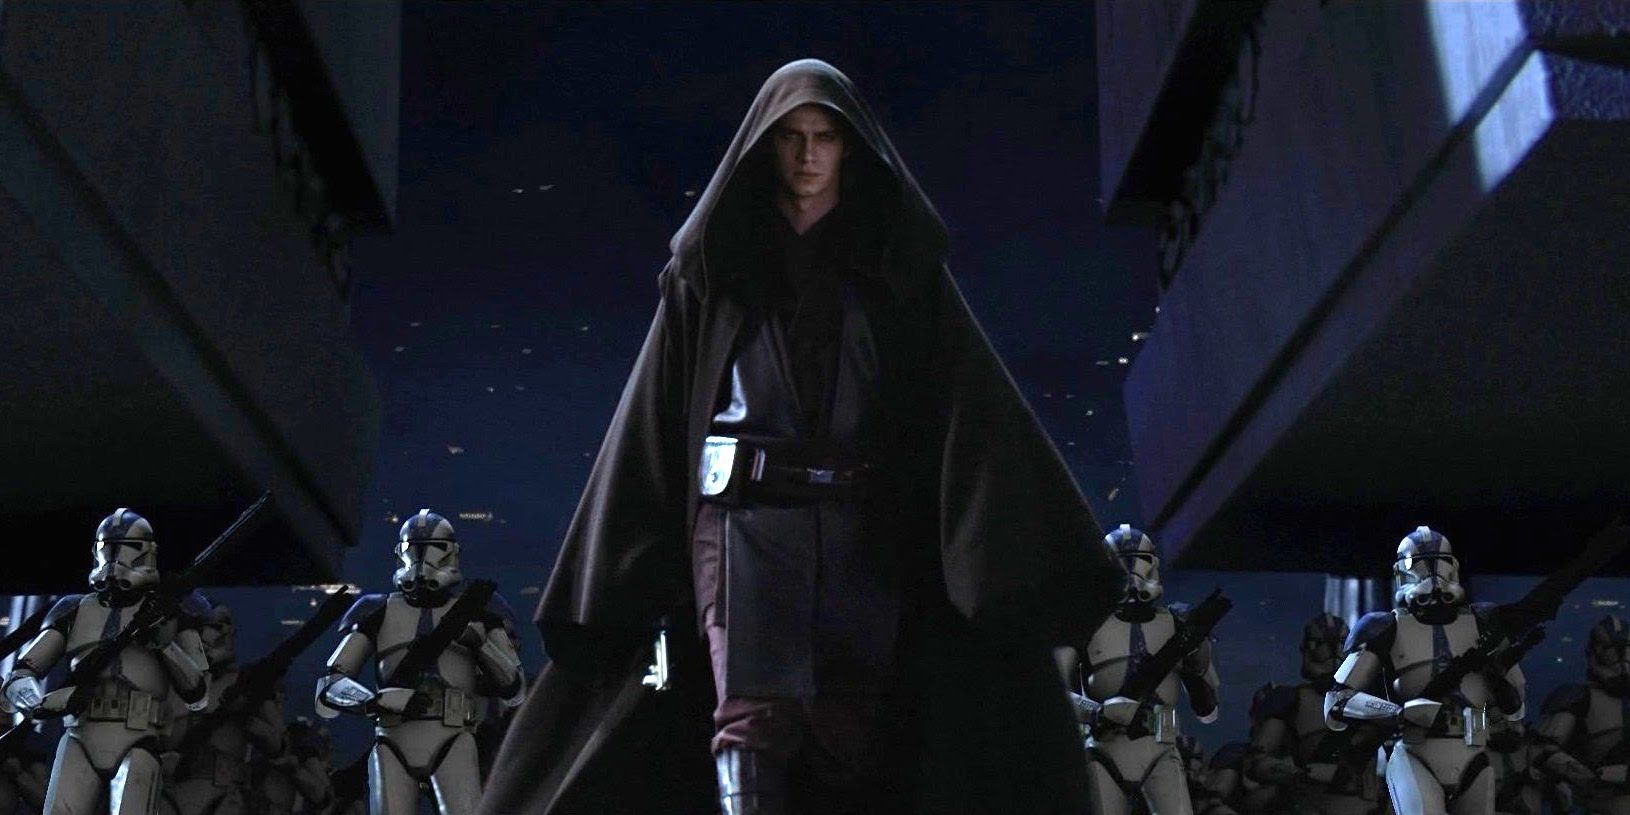 Anakin Skywalker attacks the Jedi Temple in Revenge of the Sith